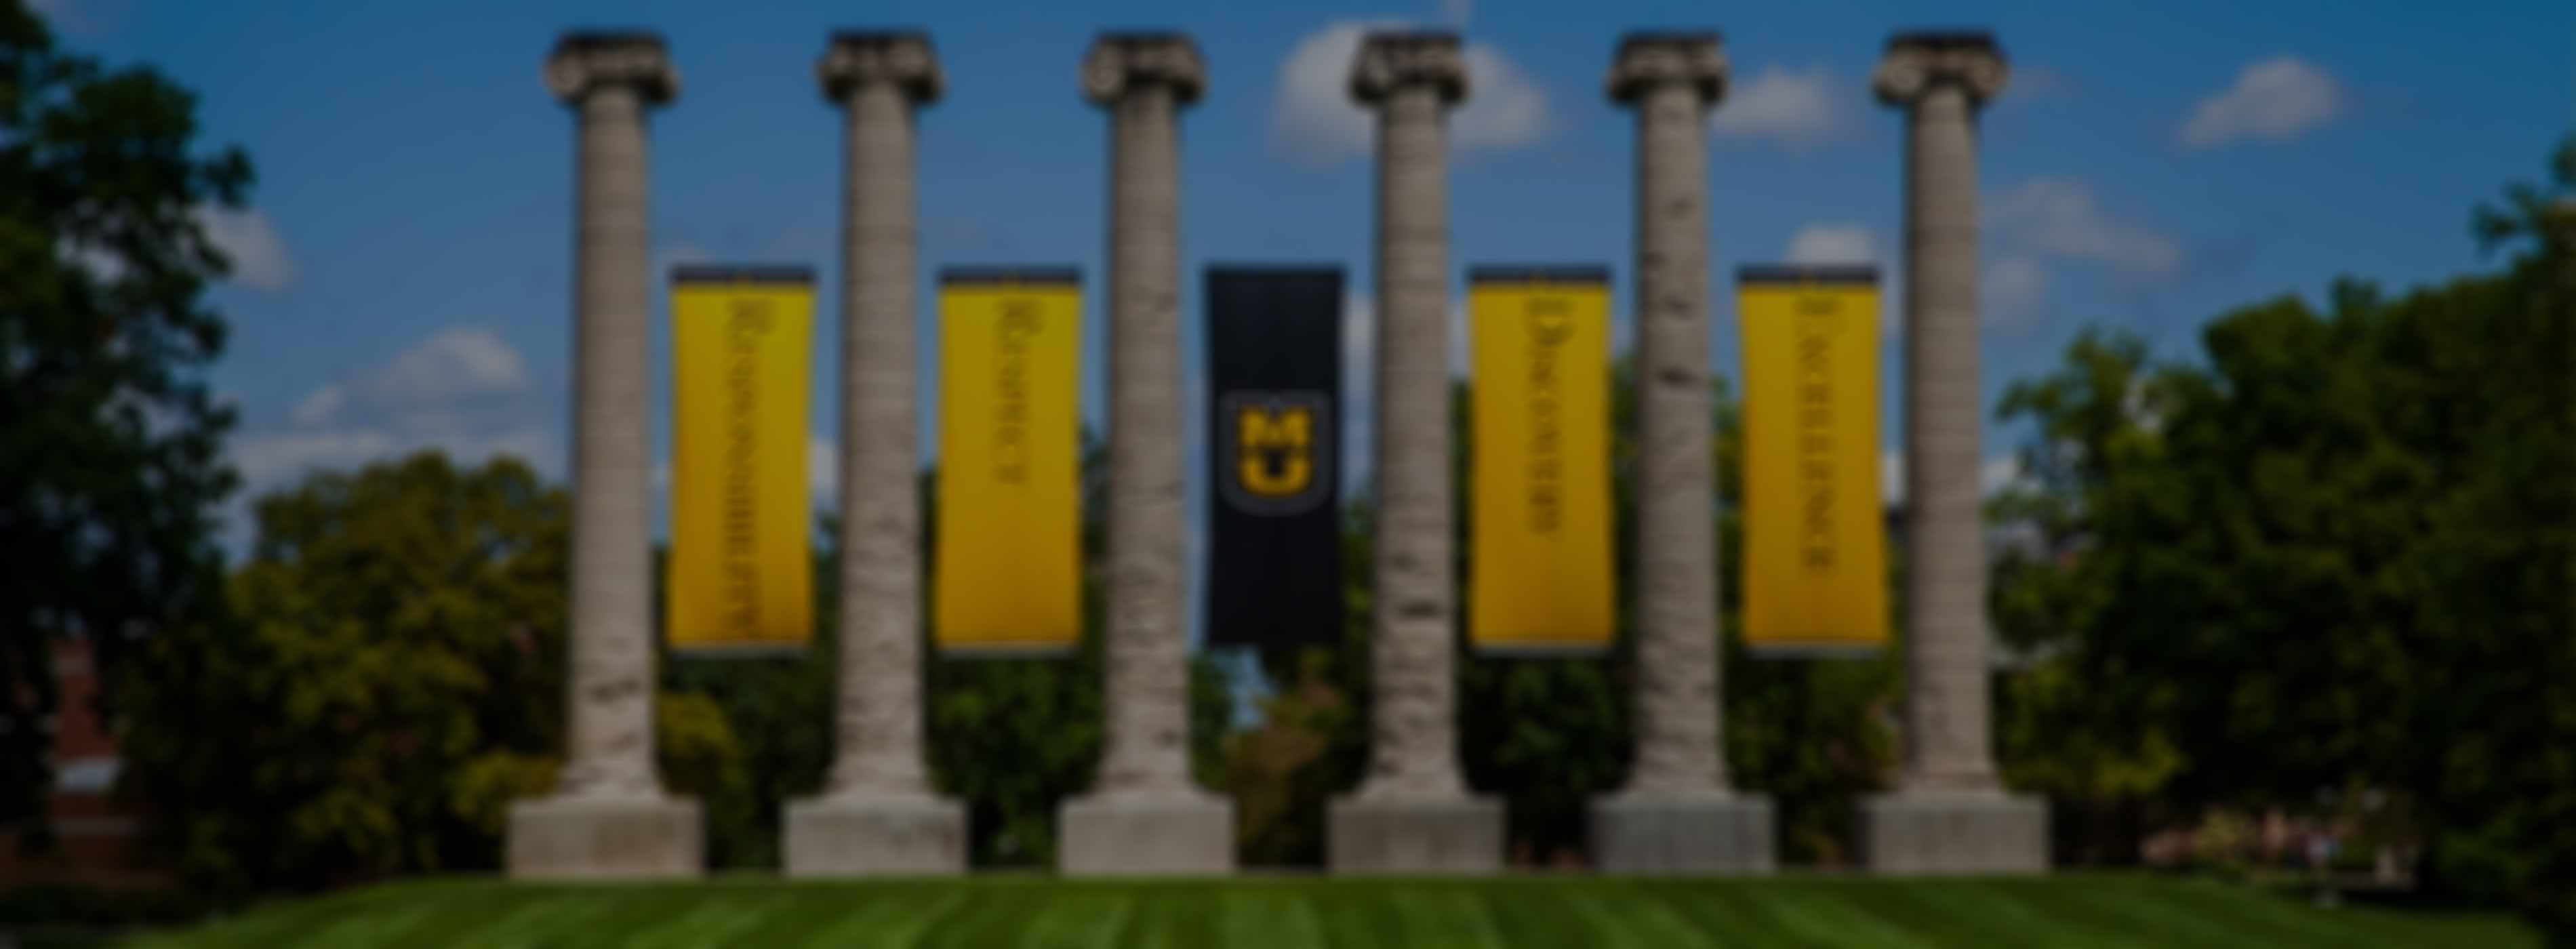 Jesse columns with banners